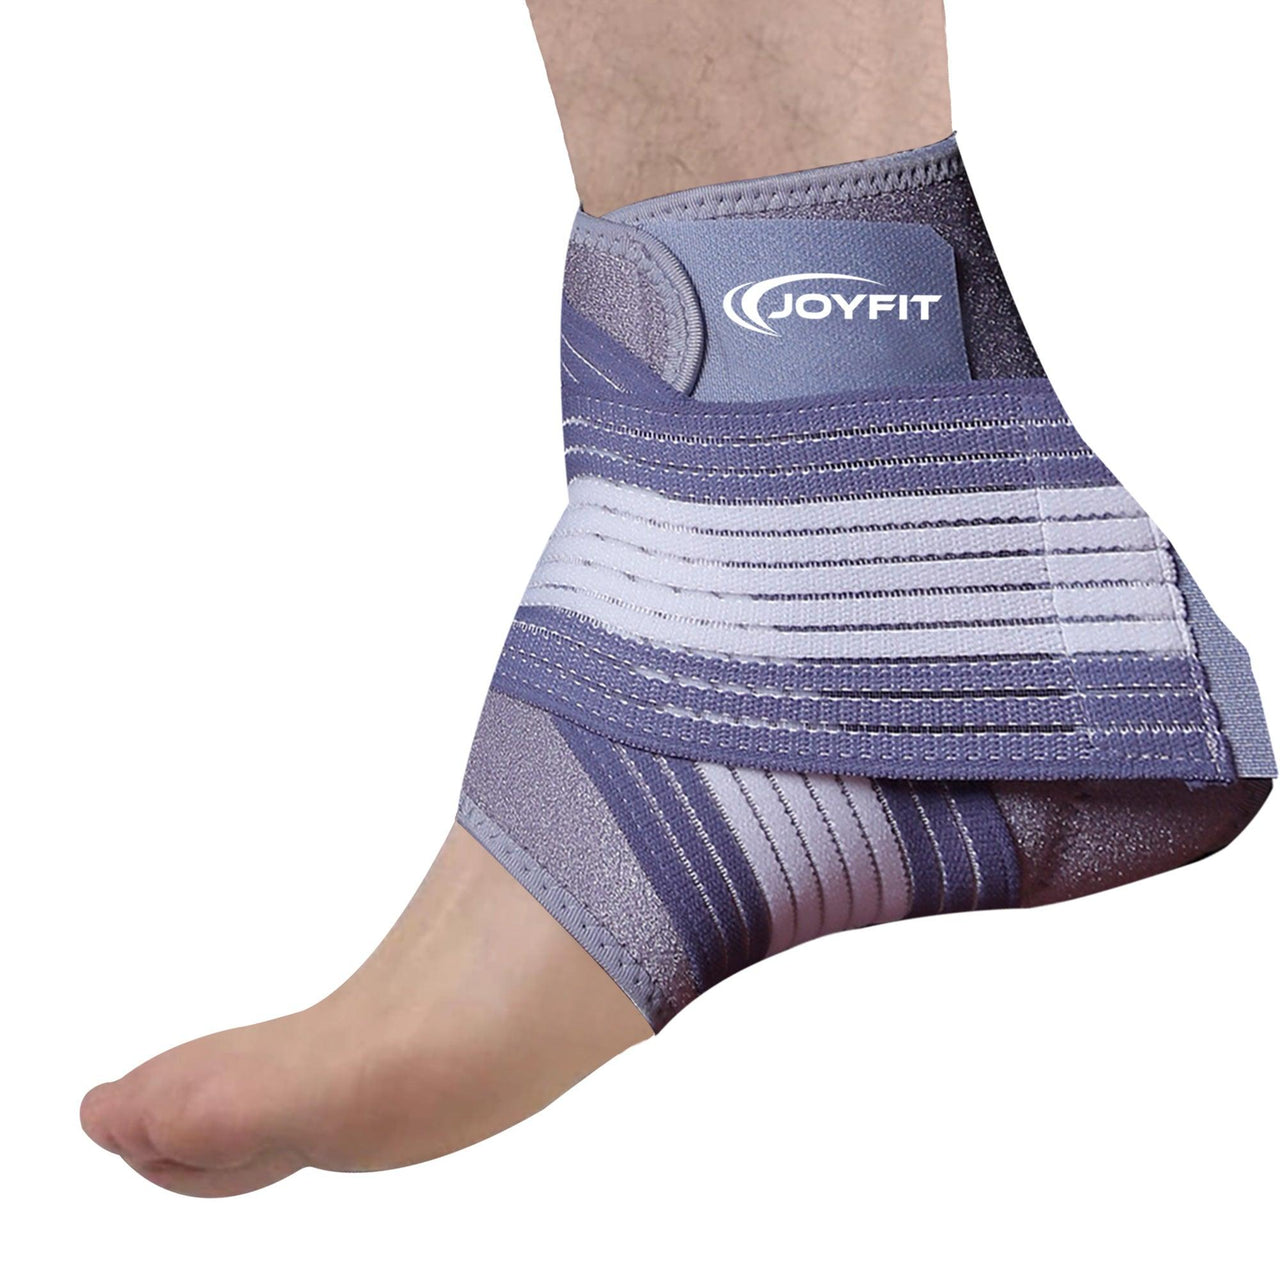 Foot Sleeve Ankle Brace, Adjustable Stable Ankle Compression Support Sleeve  for Injury Recovery, Swelling, Joint Pain, Sprained Ankle - Hook and Hoop